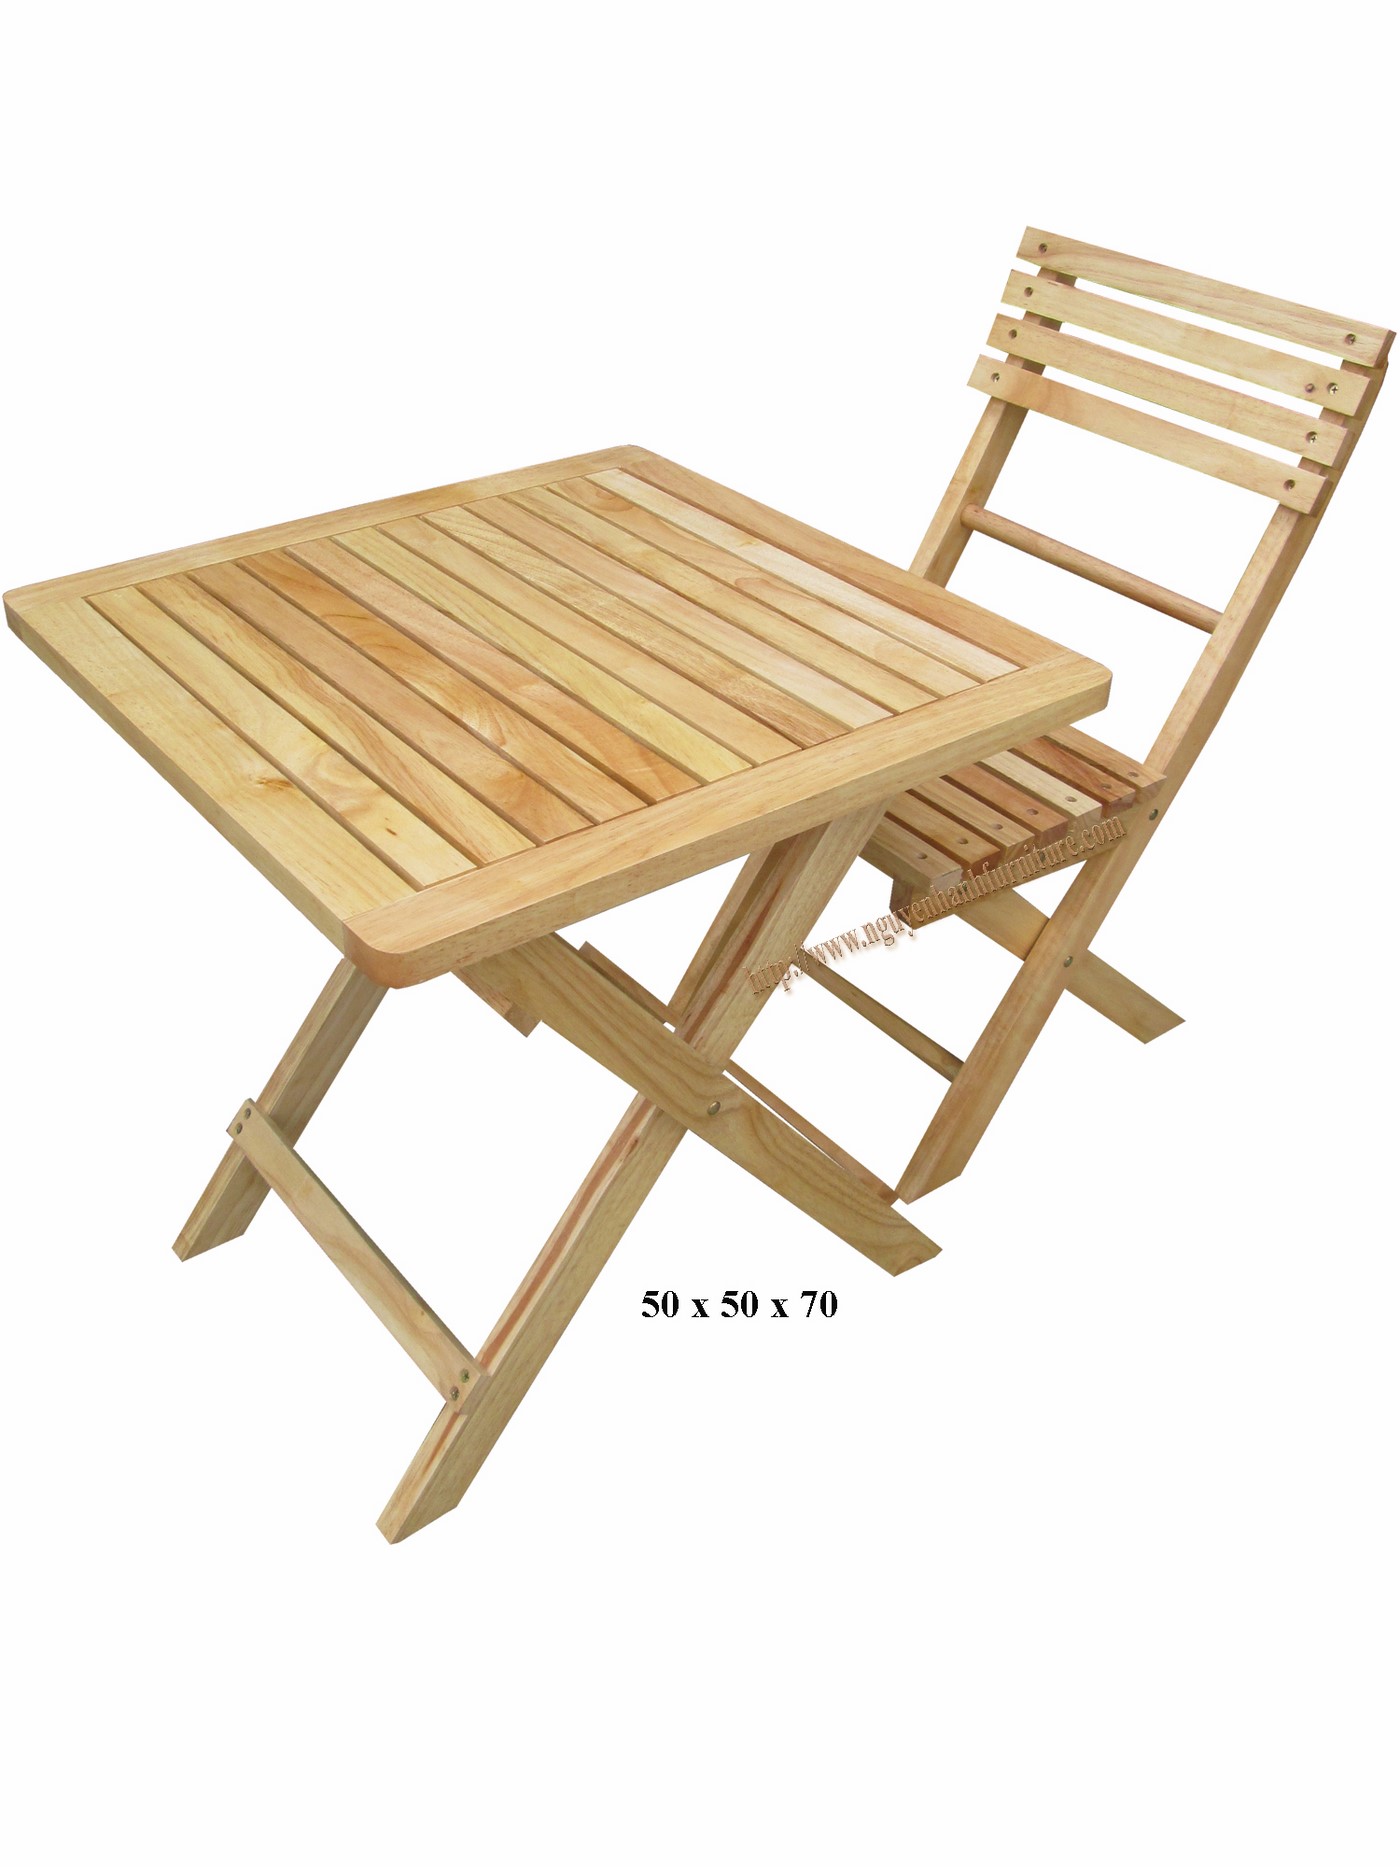 Name product: Table + Chair - Description: Wood natural rubber